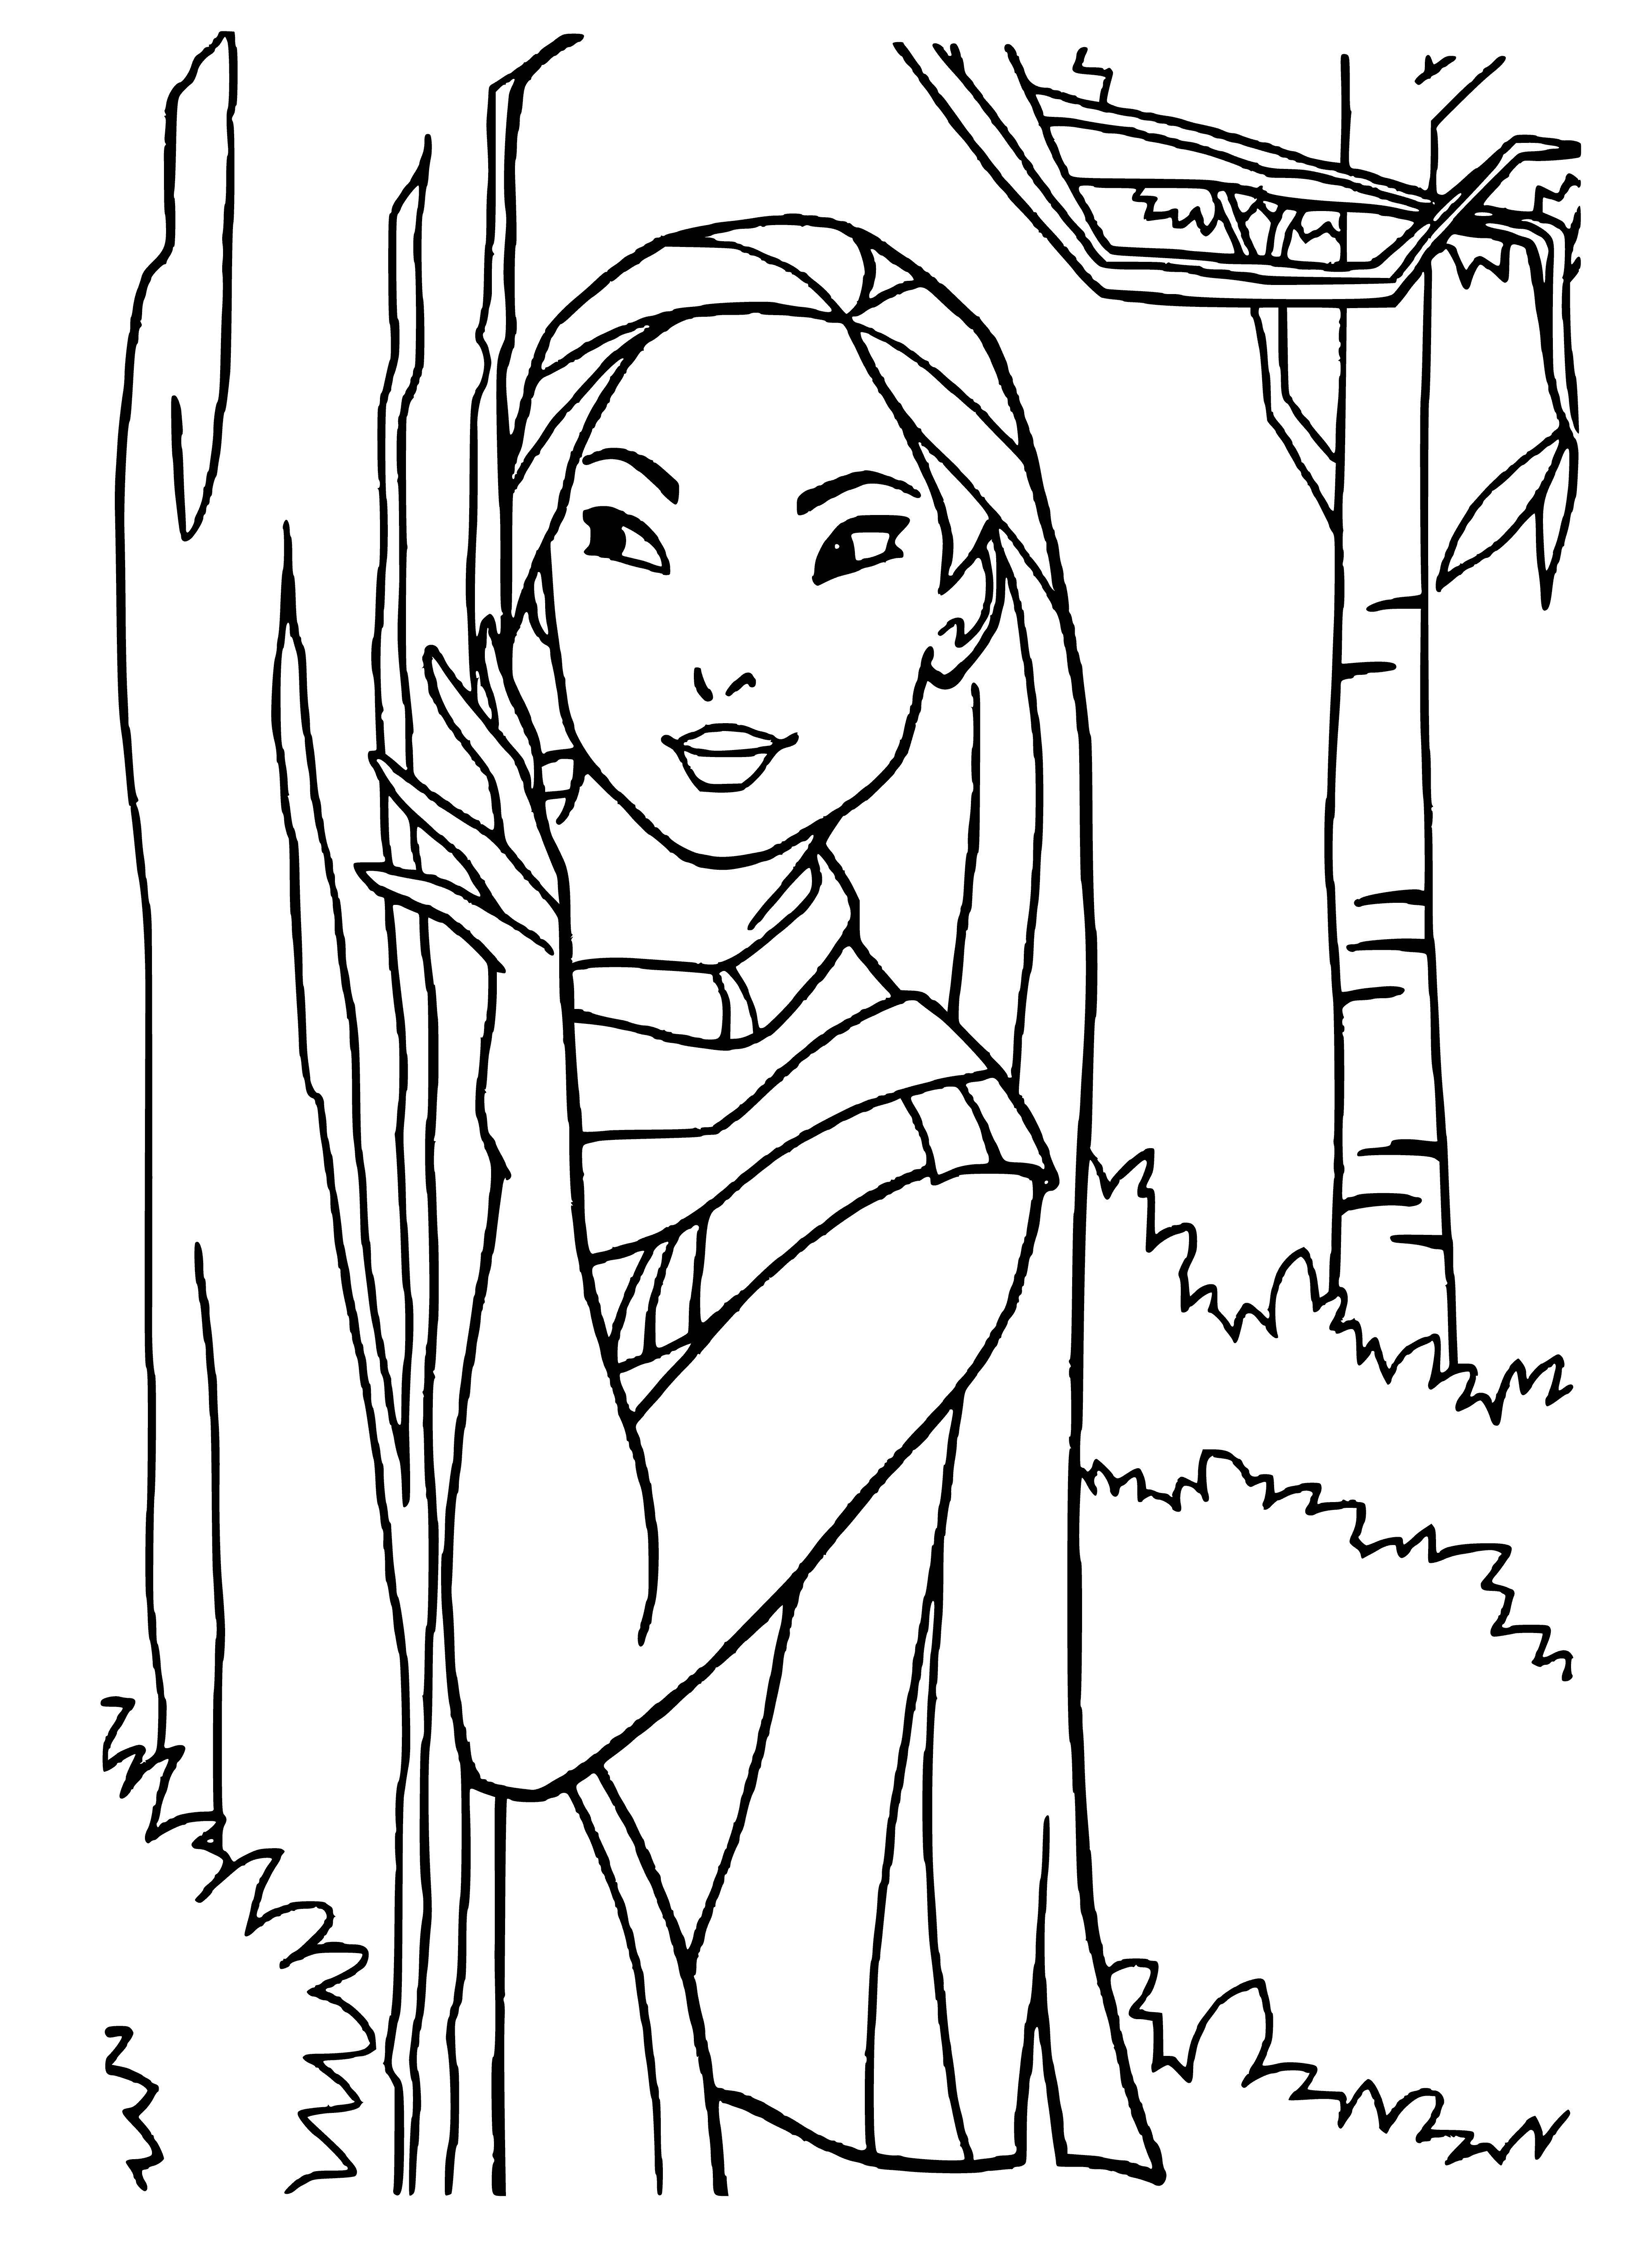 coloring page: Pocahontas lies on ground in deerskin dress, black hair cascading, pipe in hand, looking at pet wolf lying nearby. #coloringpage